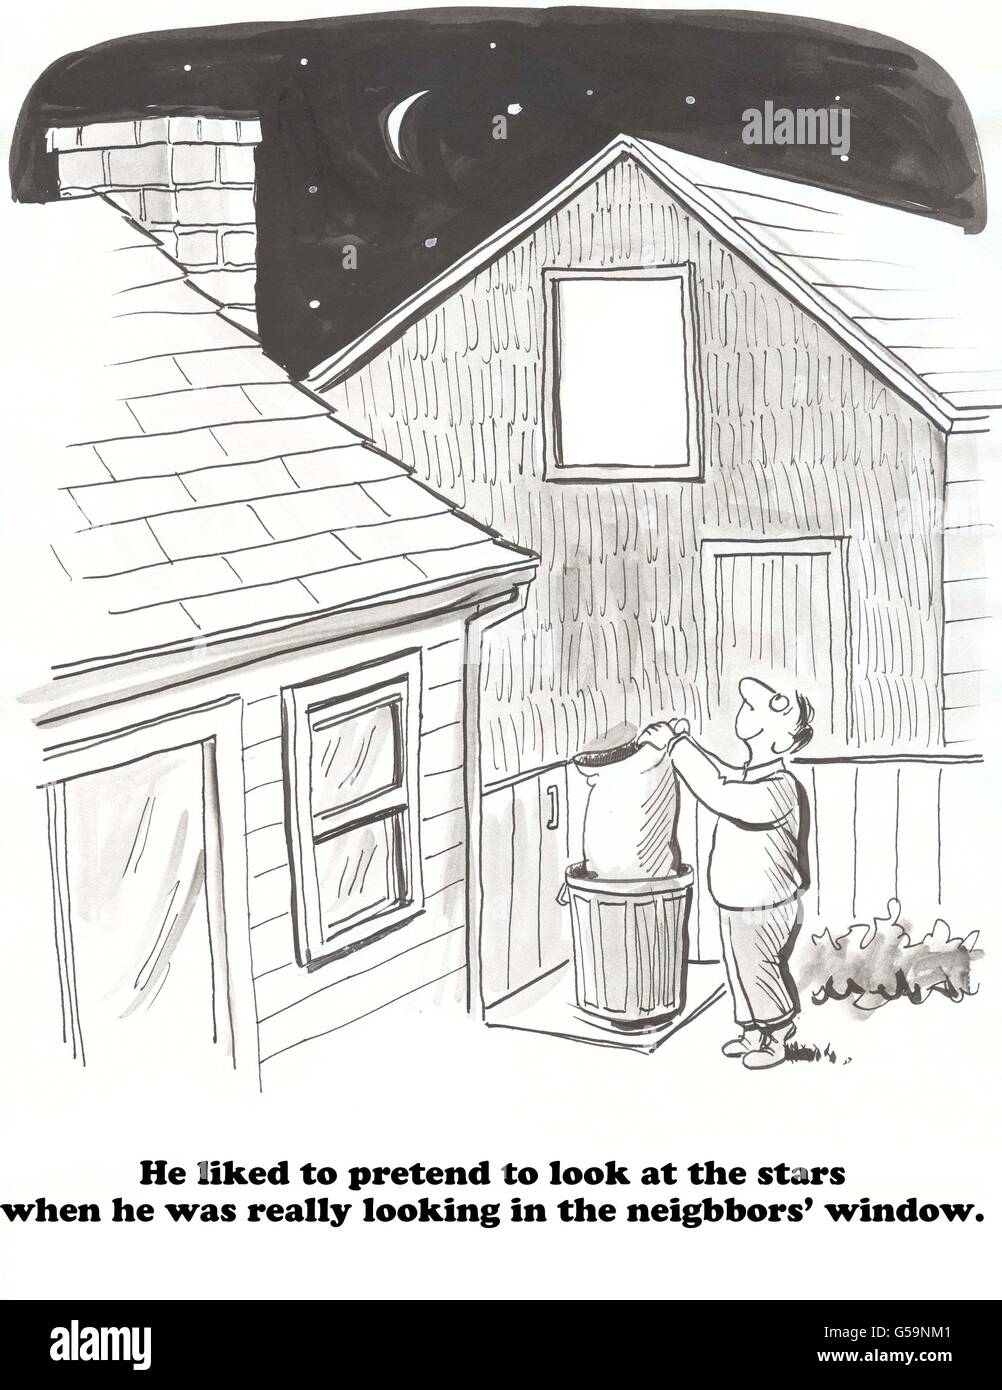 Cartoon about a peeping tom. Stock Photo